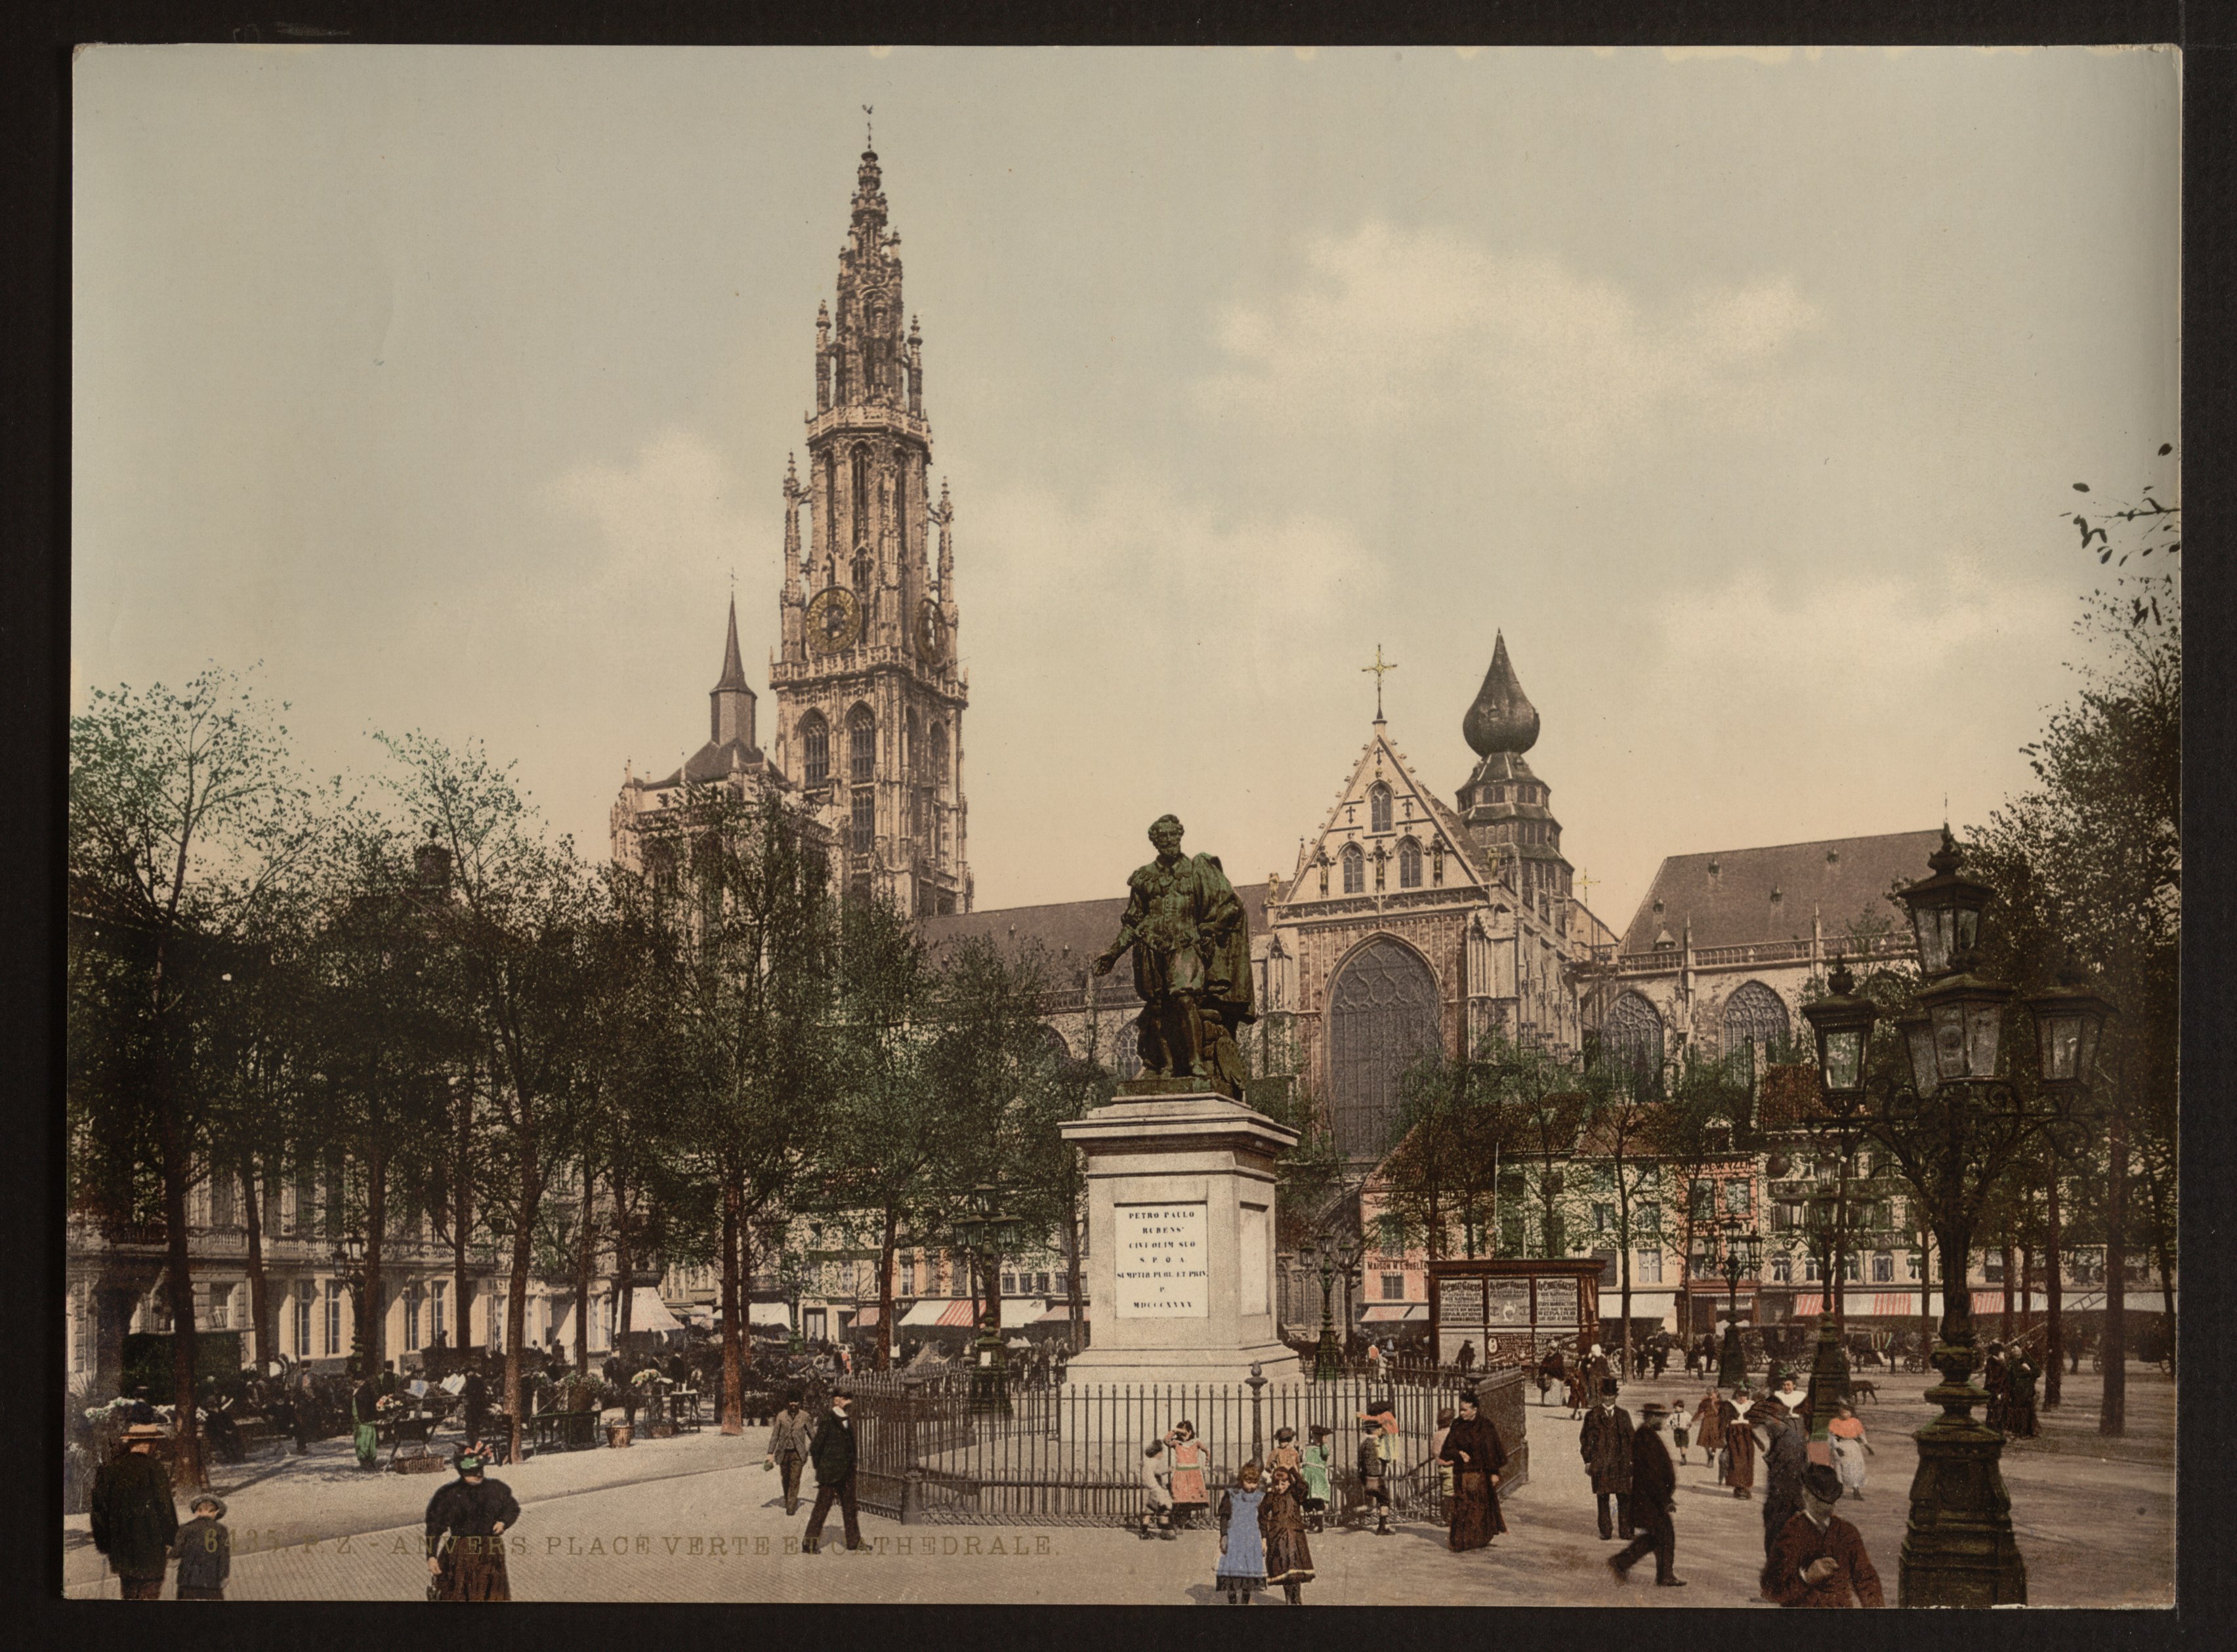 Antwerp Groenplaats, photochrom (unedited original) - Groenplaats (Green Square) in Antwerp (ca. 1890-1900). Foreground: statue of Peter Paul Rubens. Background: Cathedral of Our Lady.